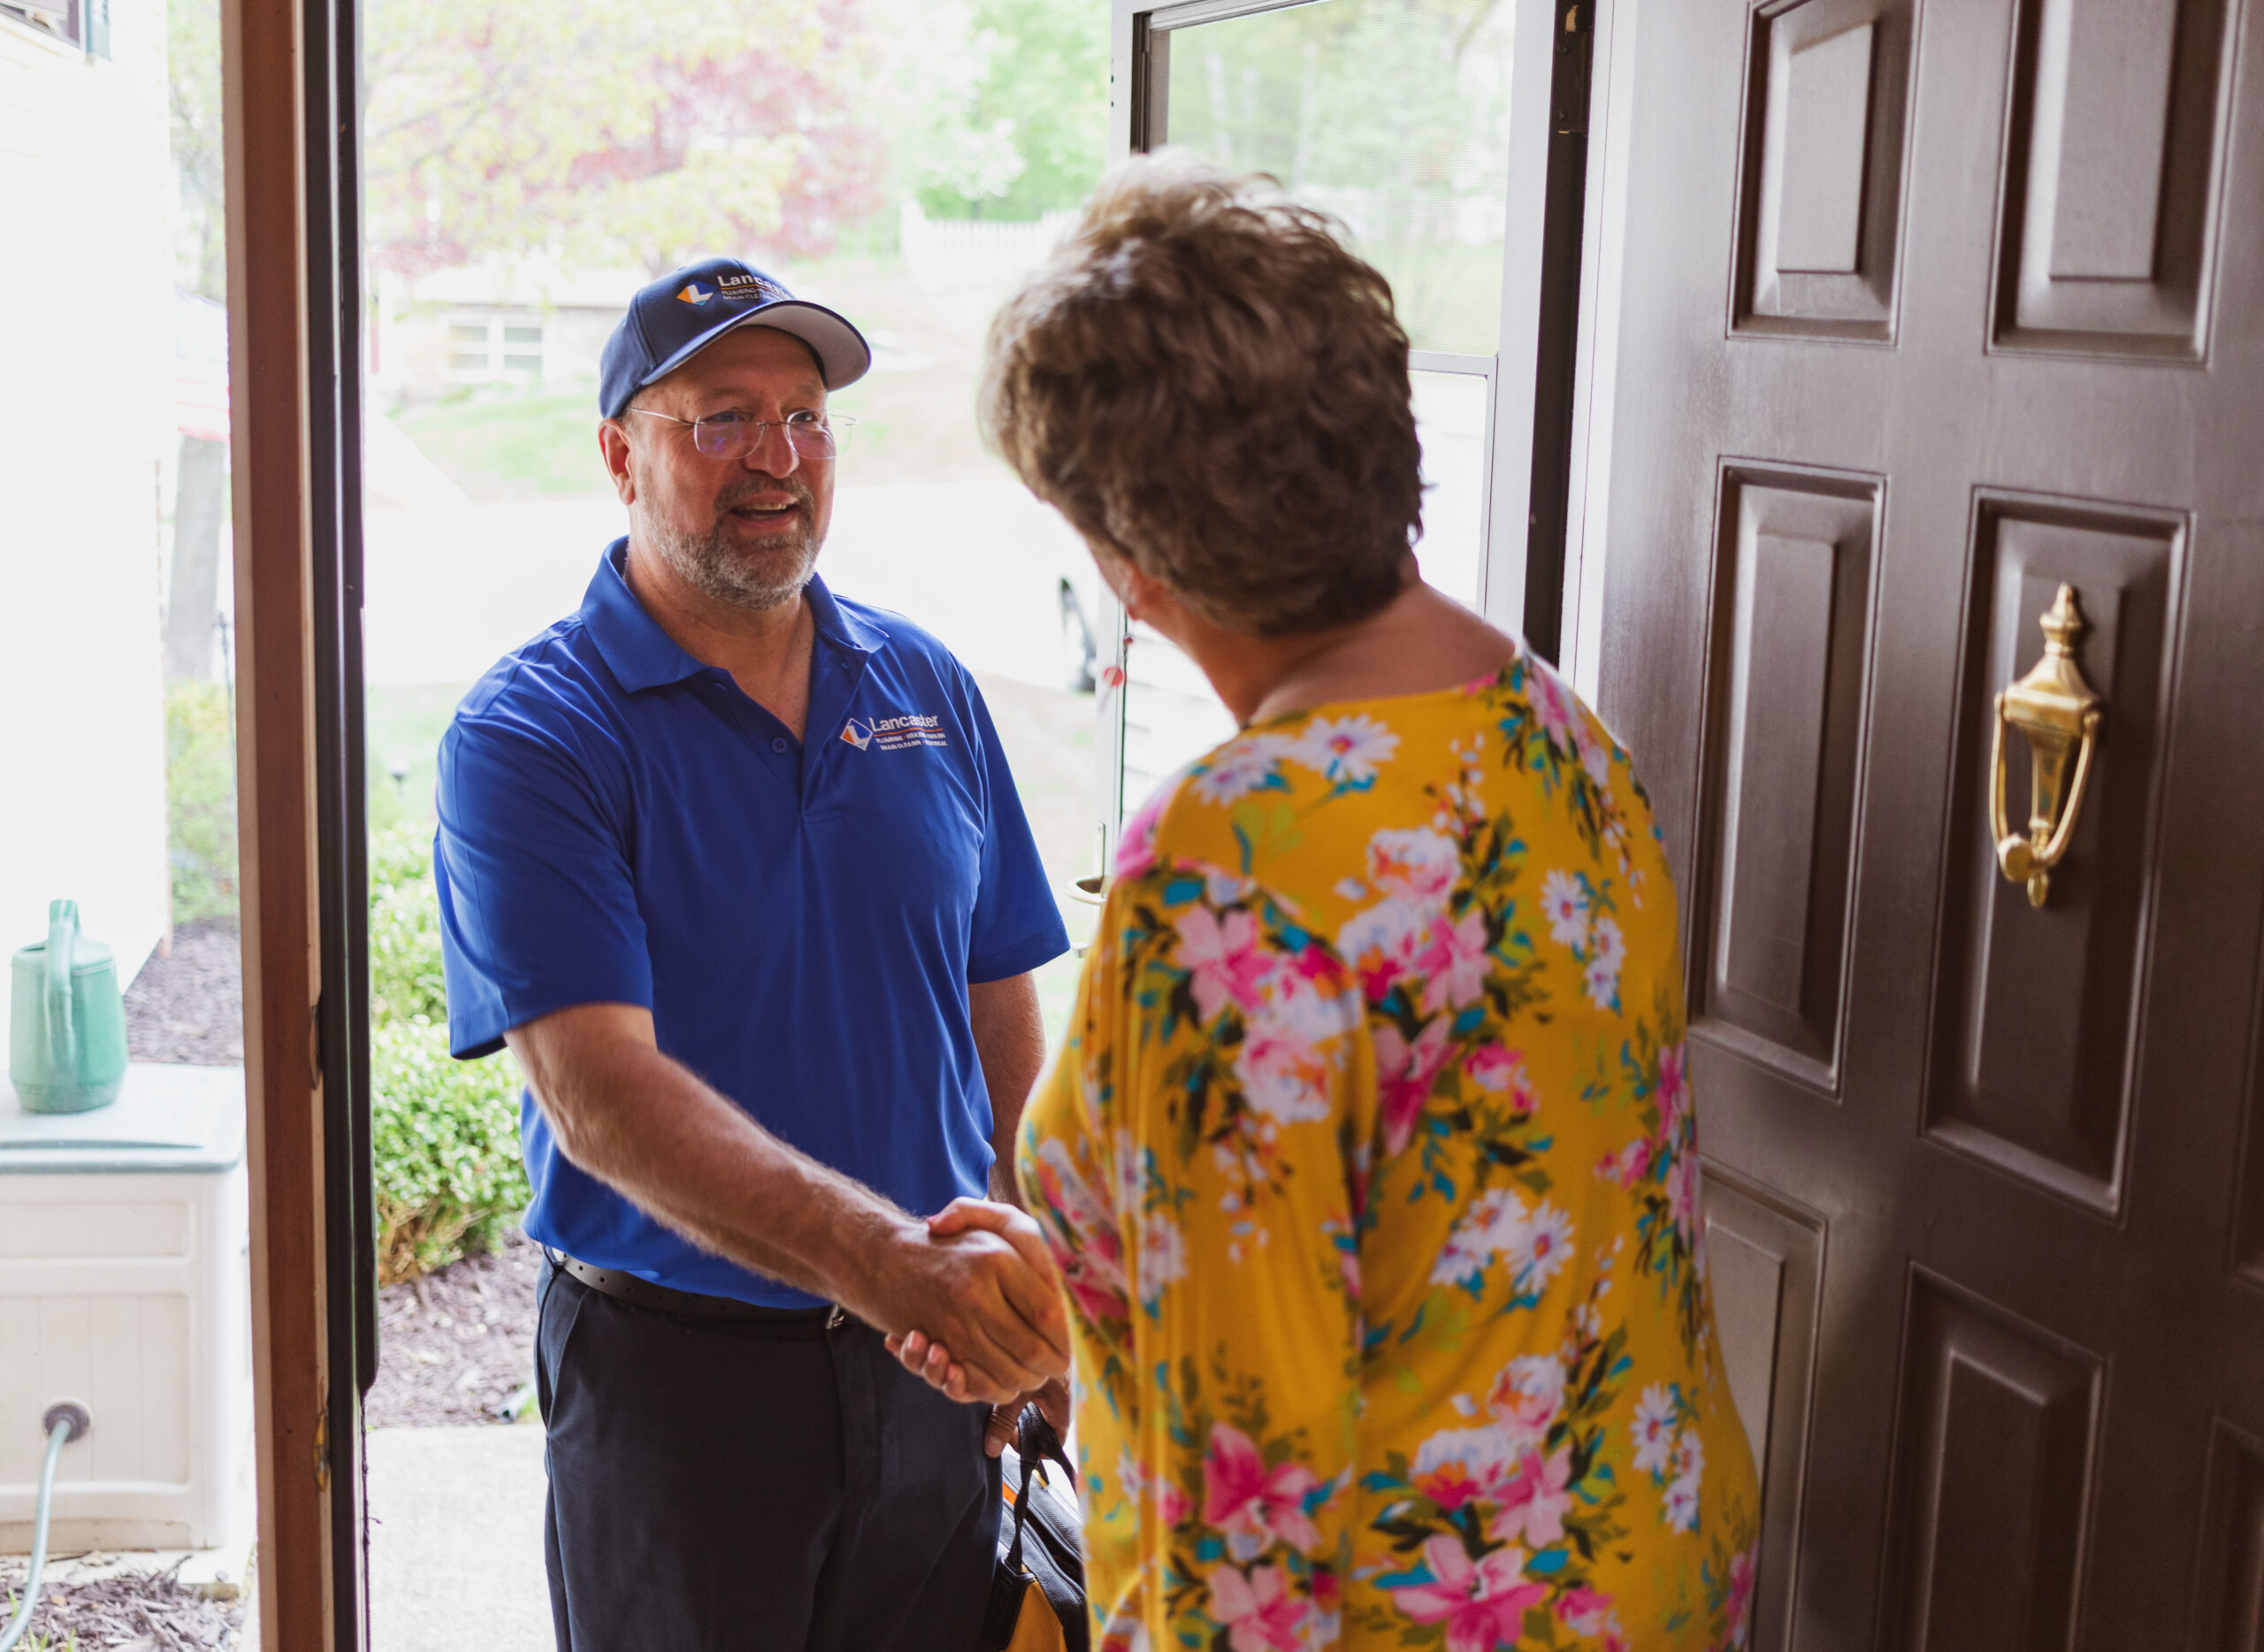 Lancaster Plumbing, Heating, Cooling & Electrical employee greets homeowner at front door.